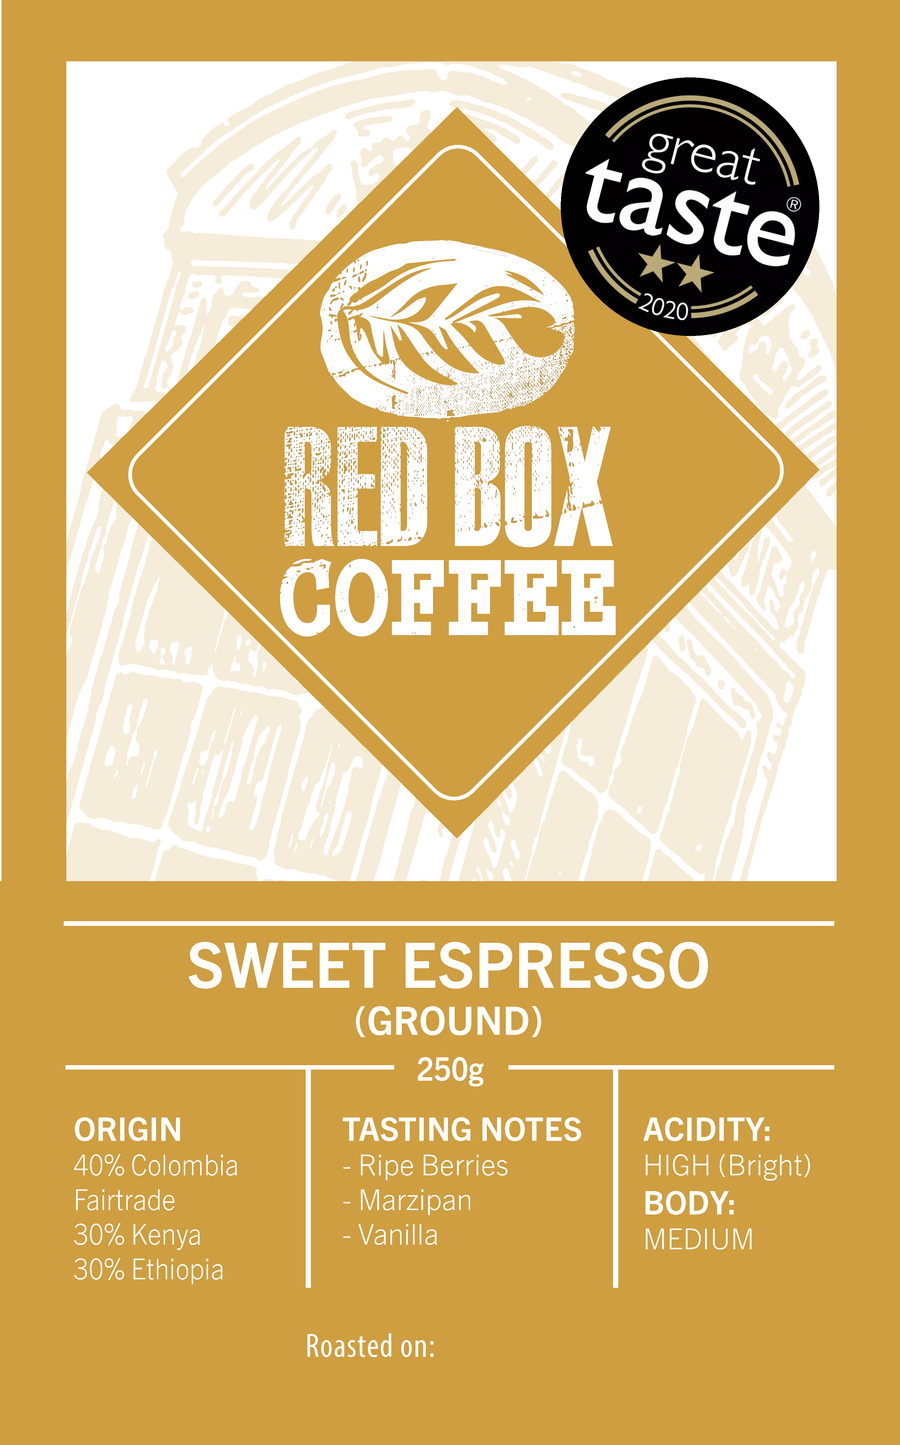 Red Box Sweet Espresso,  Great Taste 2-Star 2020 - GROUND FOR FRENCH PRESS